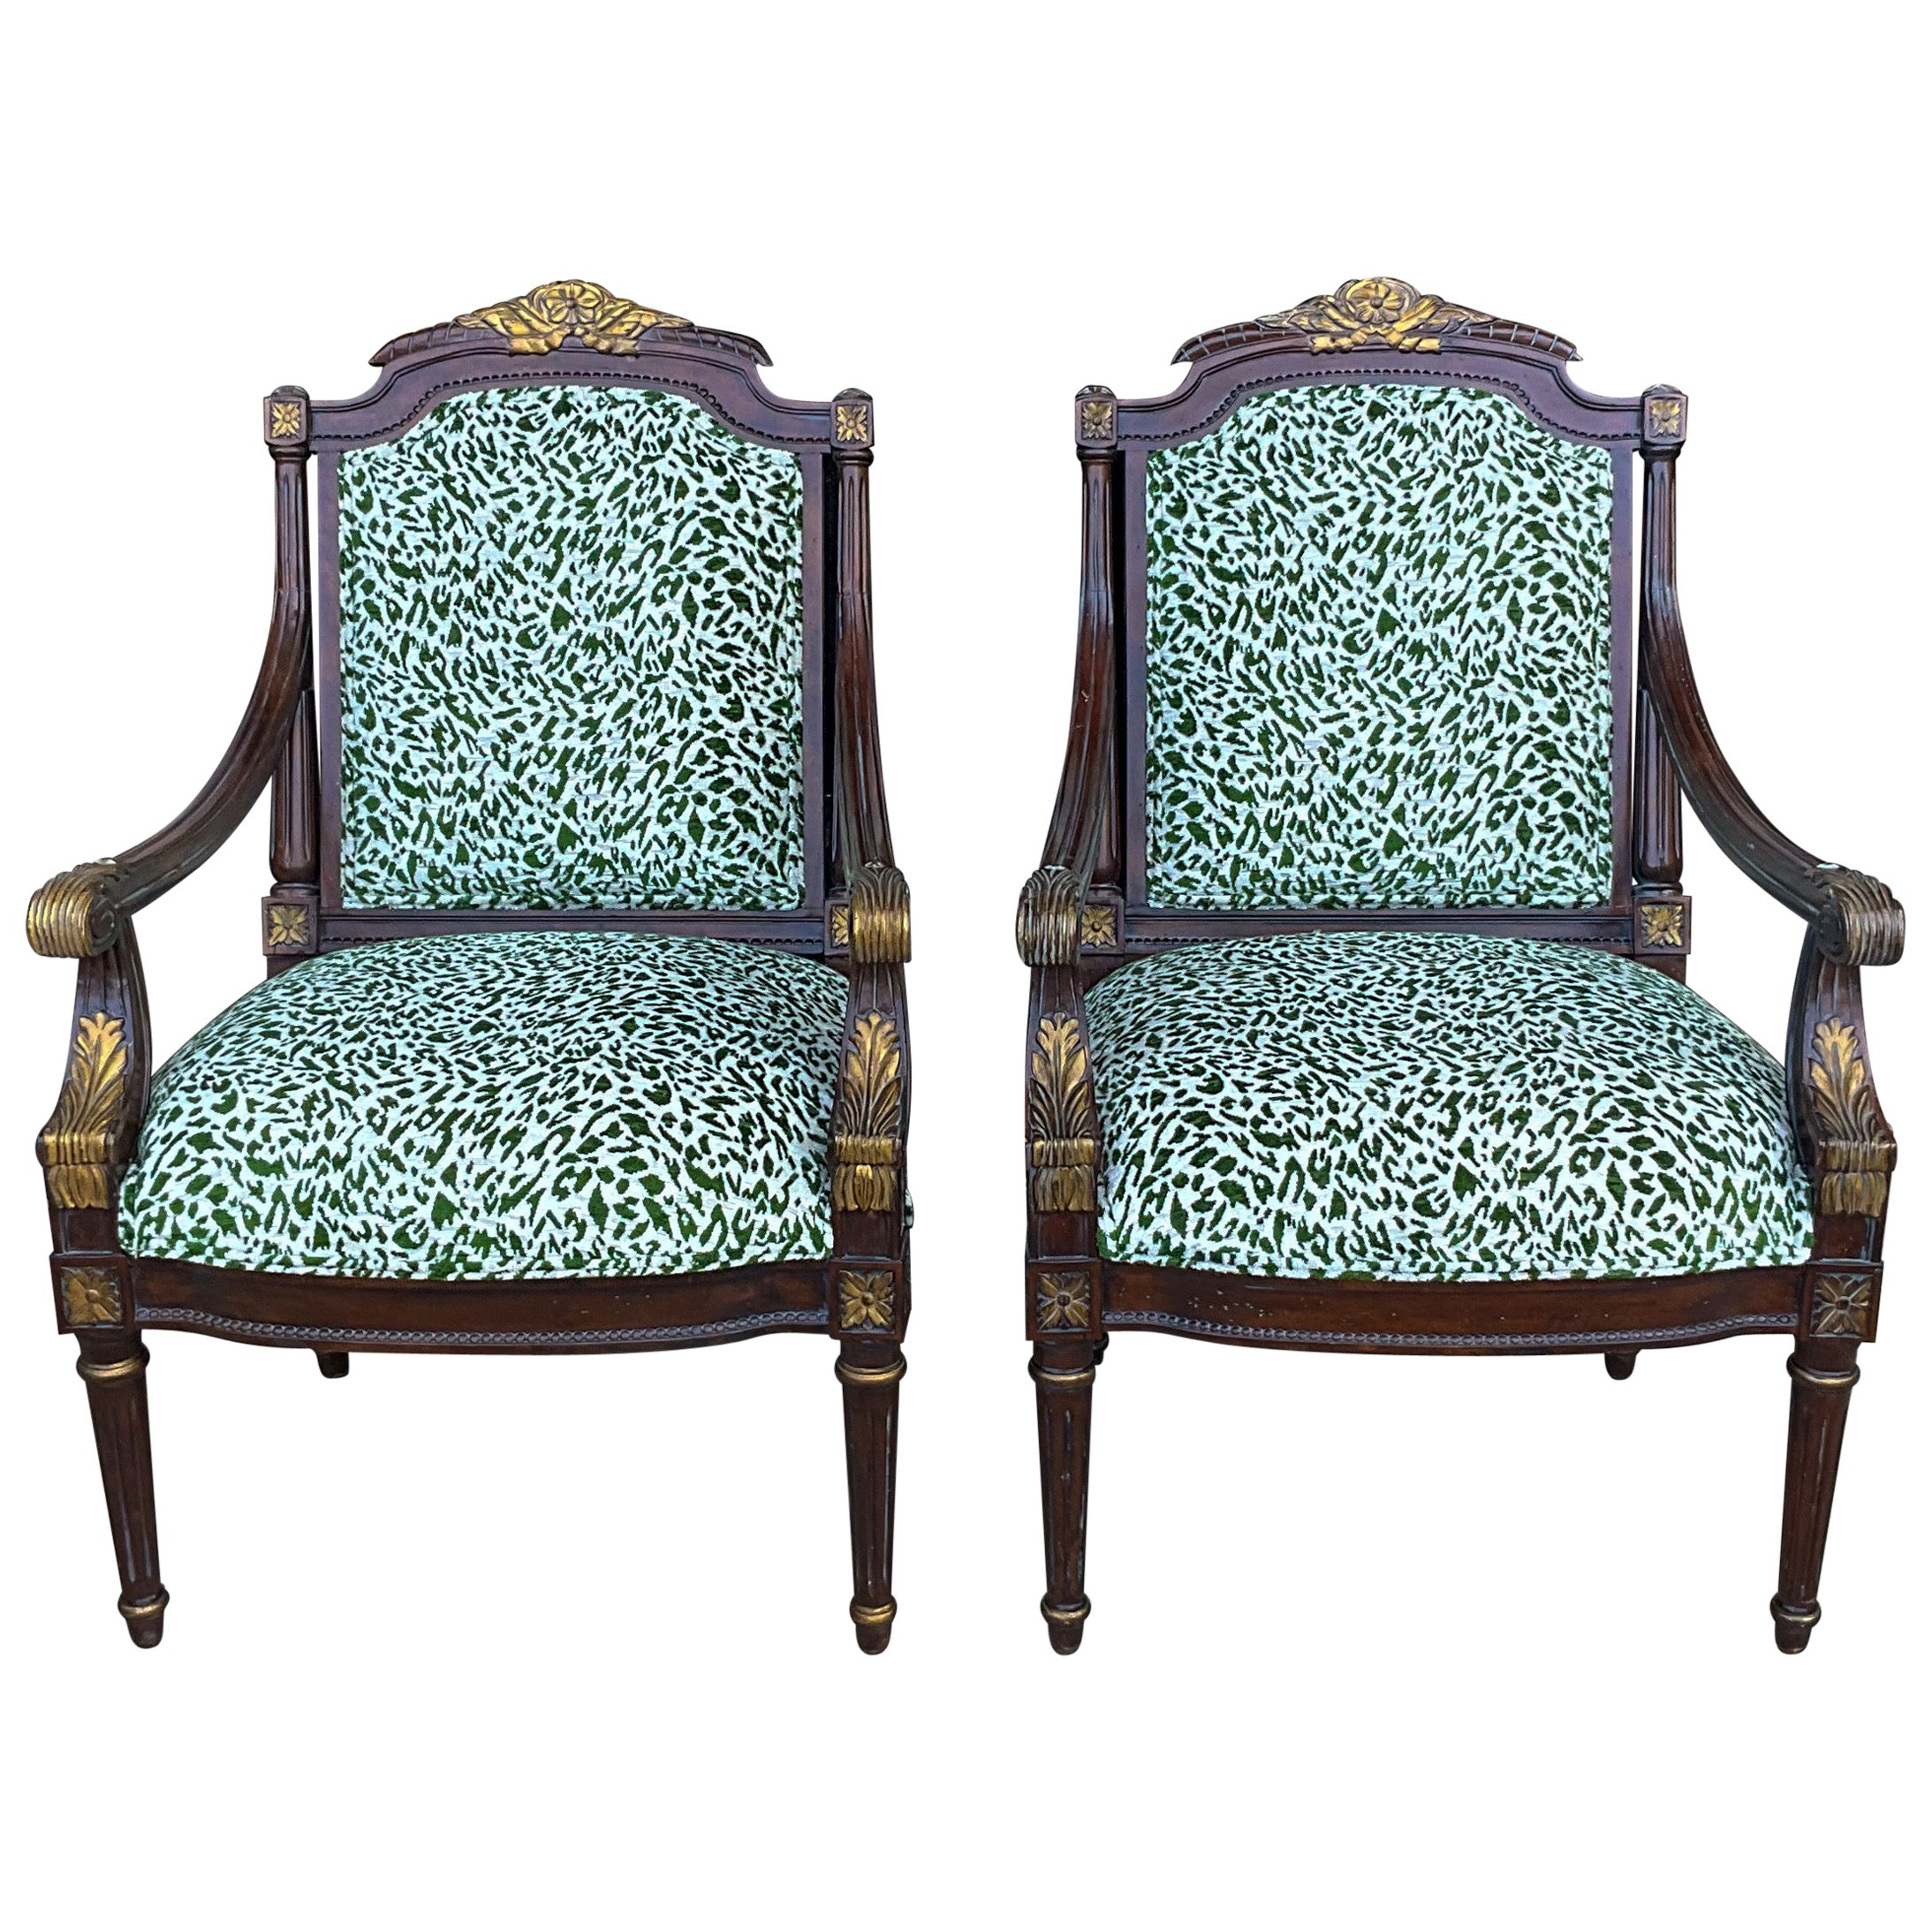 American French Louis XVI Style Mahogany & Giltwood Bergere Chairs In Green Velvet - Pair For Sale